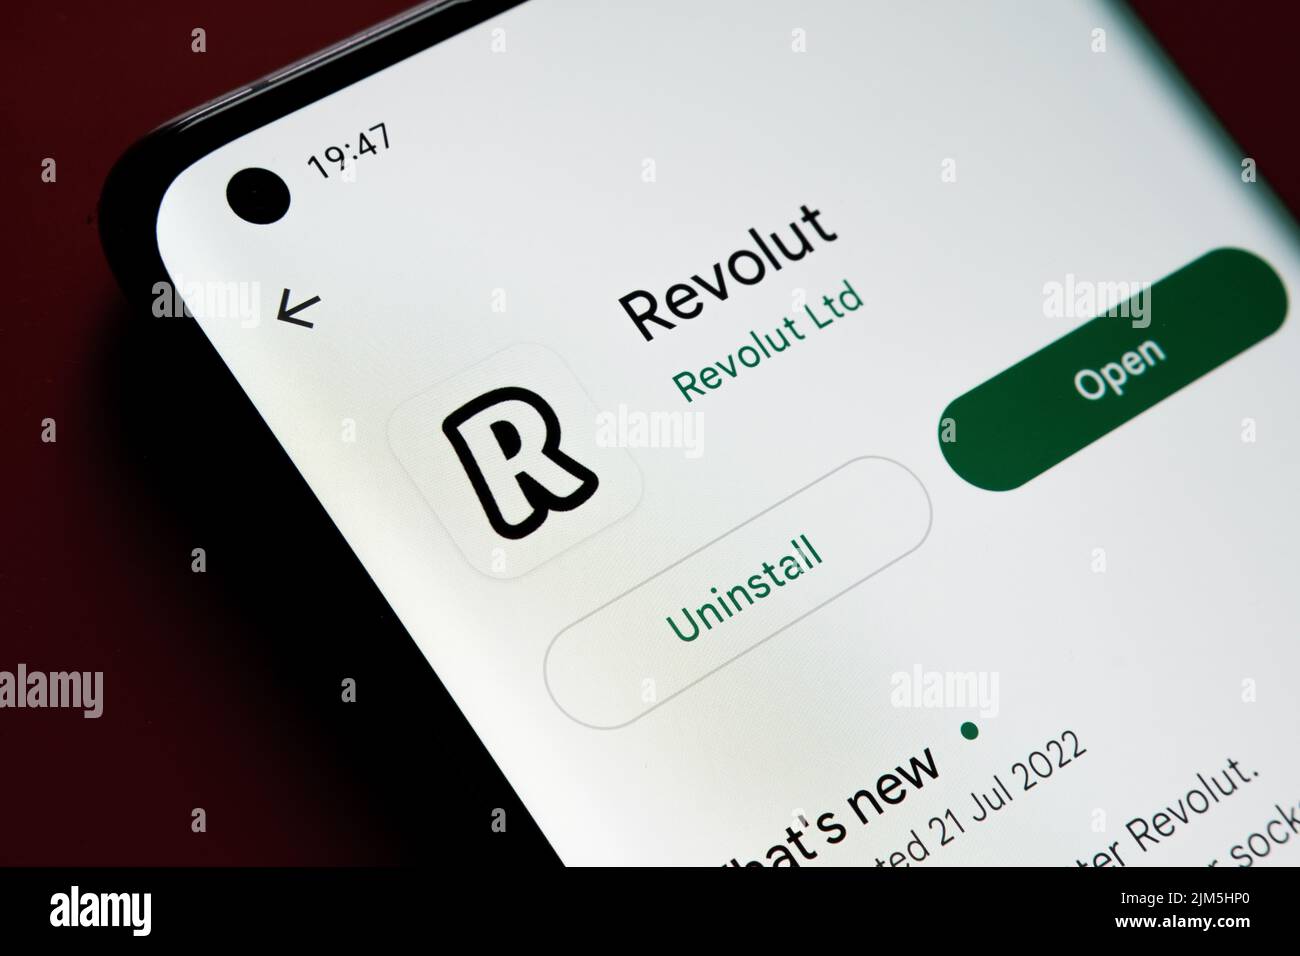 revolut app seen in Google Play Store on the smartphone screen placed on red background. Close up photo with selective focus. Stafford, United Kingdom Stock Photo